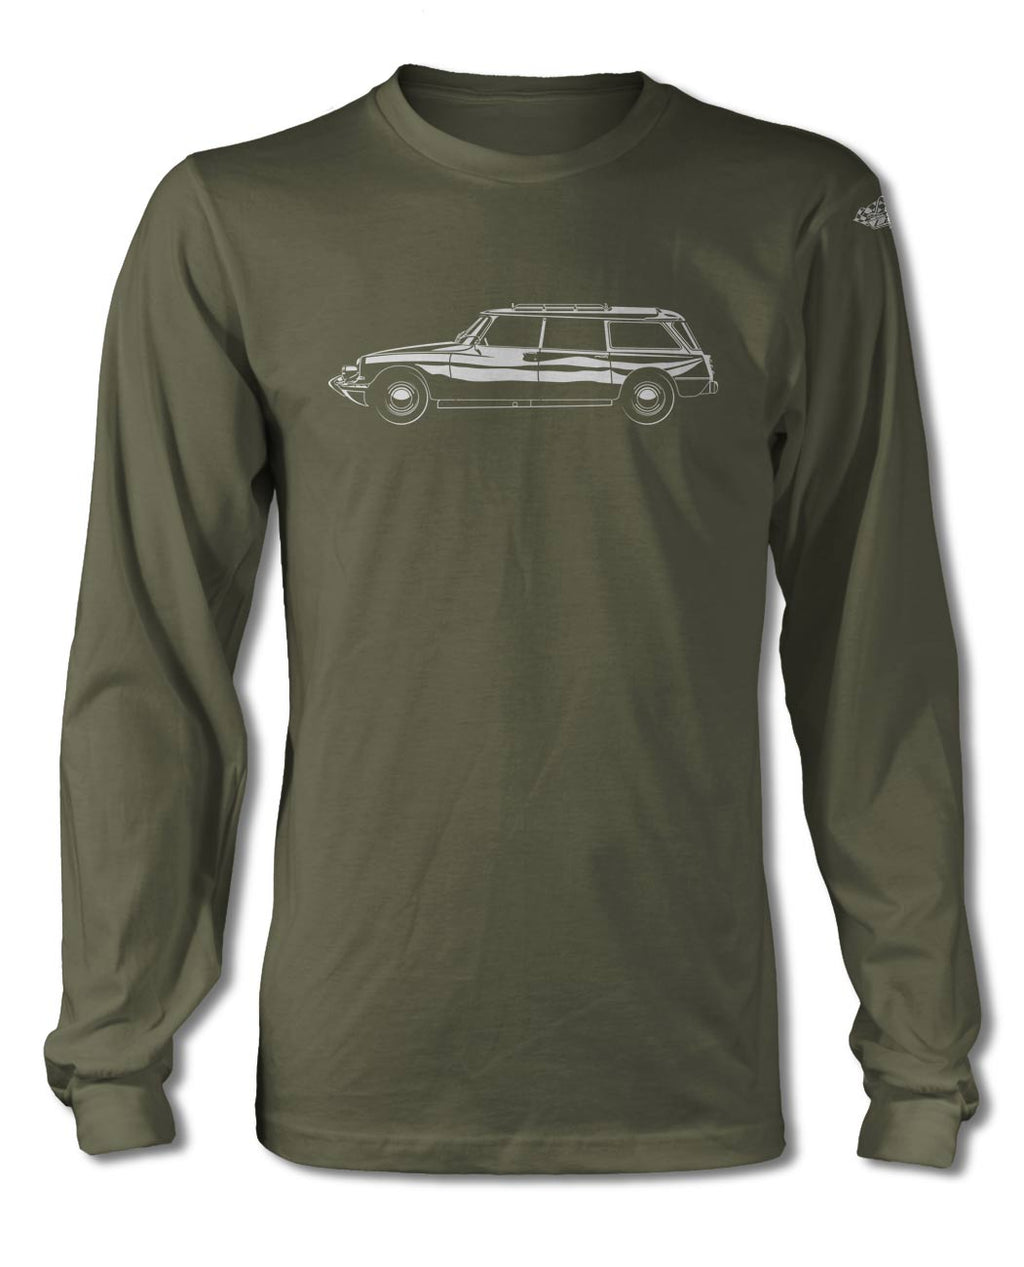 Citroen DS ID 1958 - 1967 Station Wagon T-Shirt - Long Sleeves - Side View